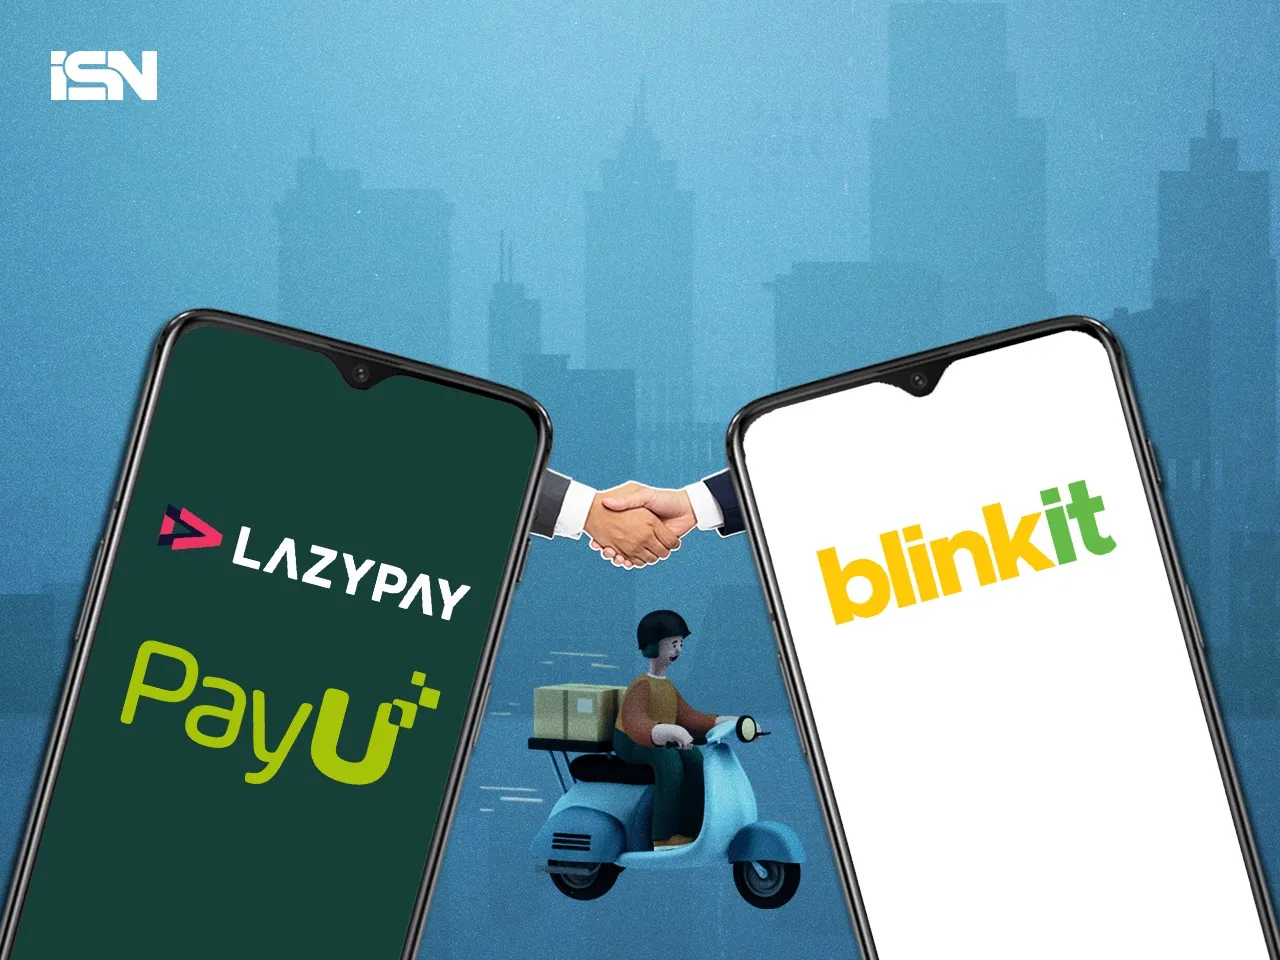 LazyPay and Zomato-owned Blinkit addition